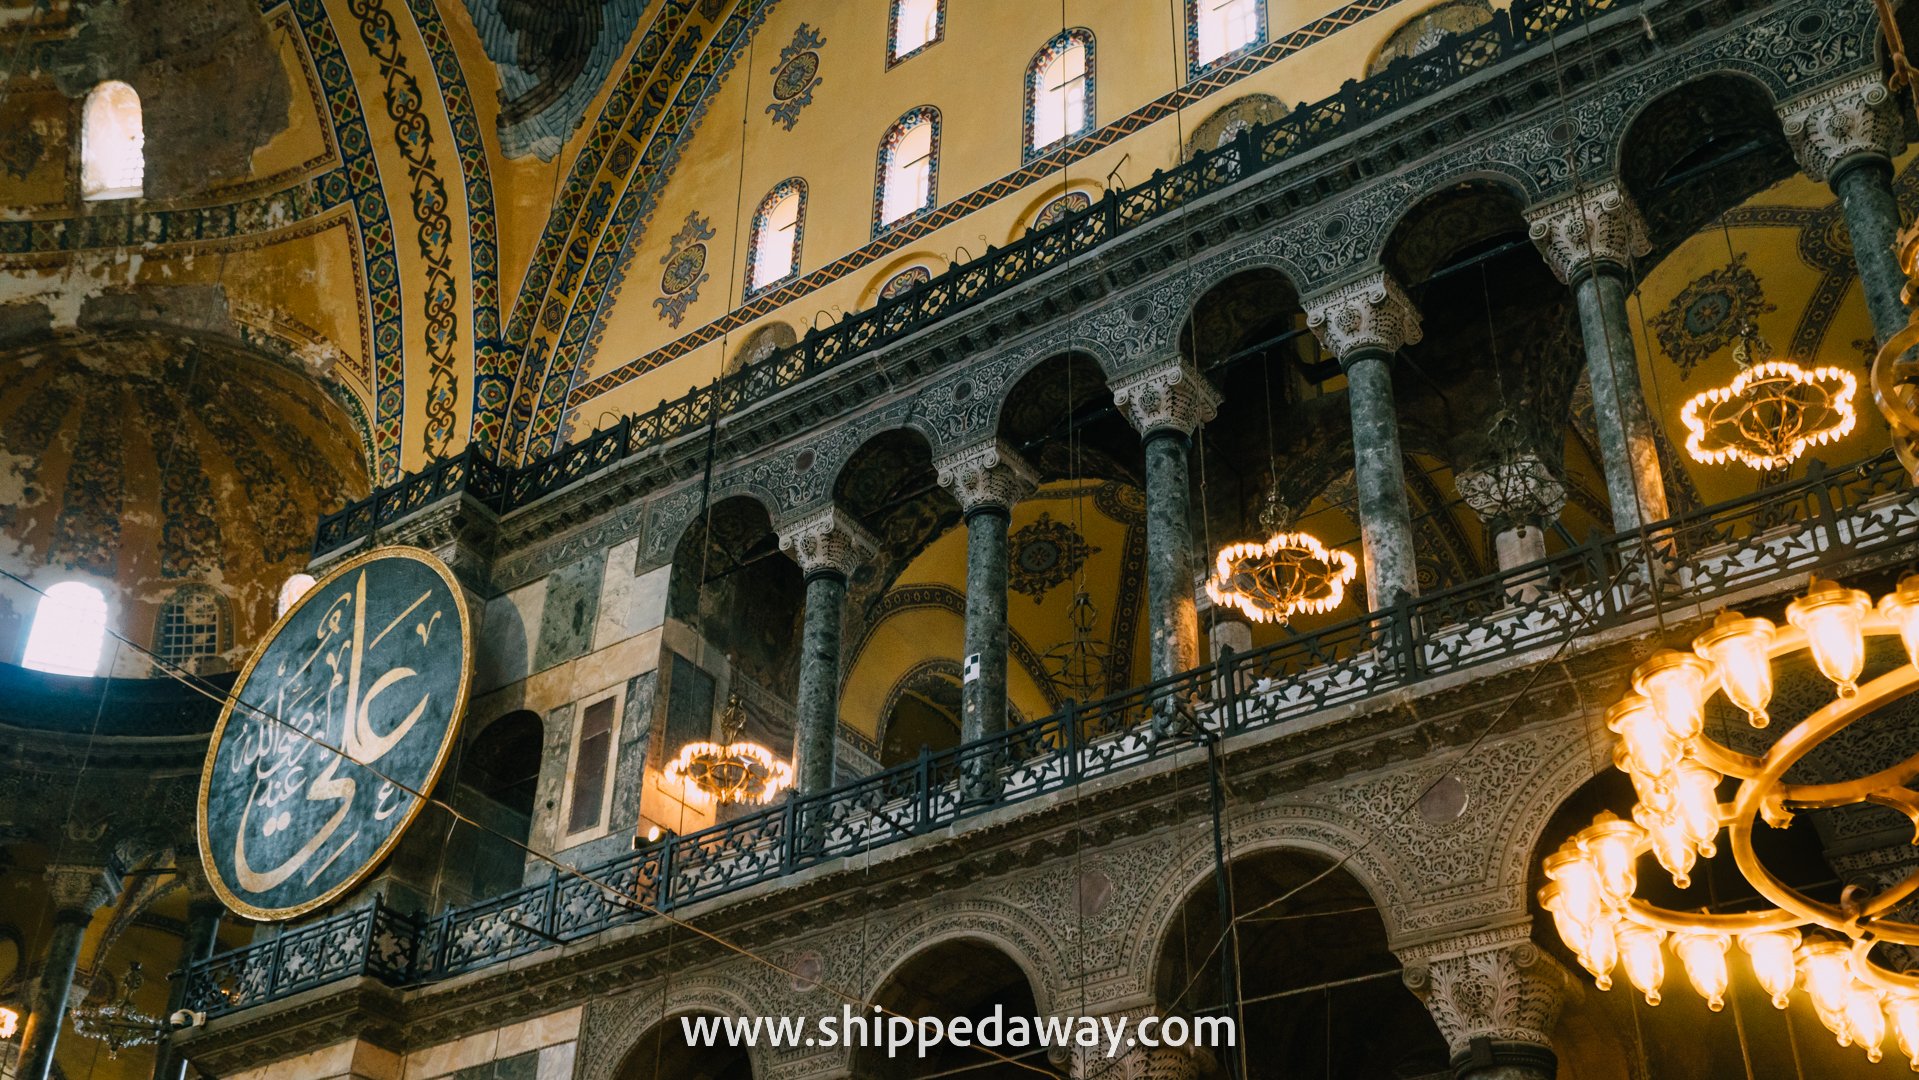 Intricate design and details on walls and columns in Hagia Sophia, Istanbul, Turkey